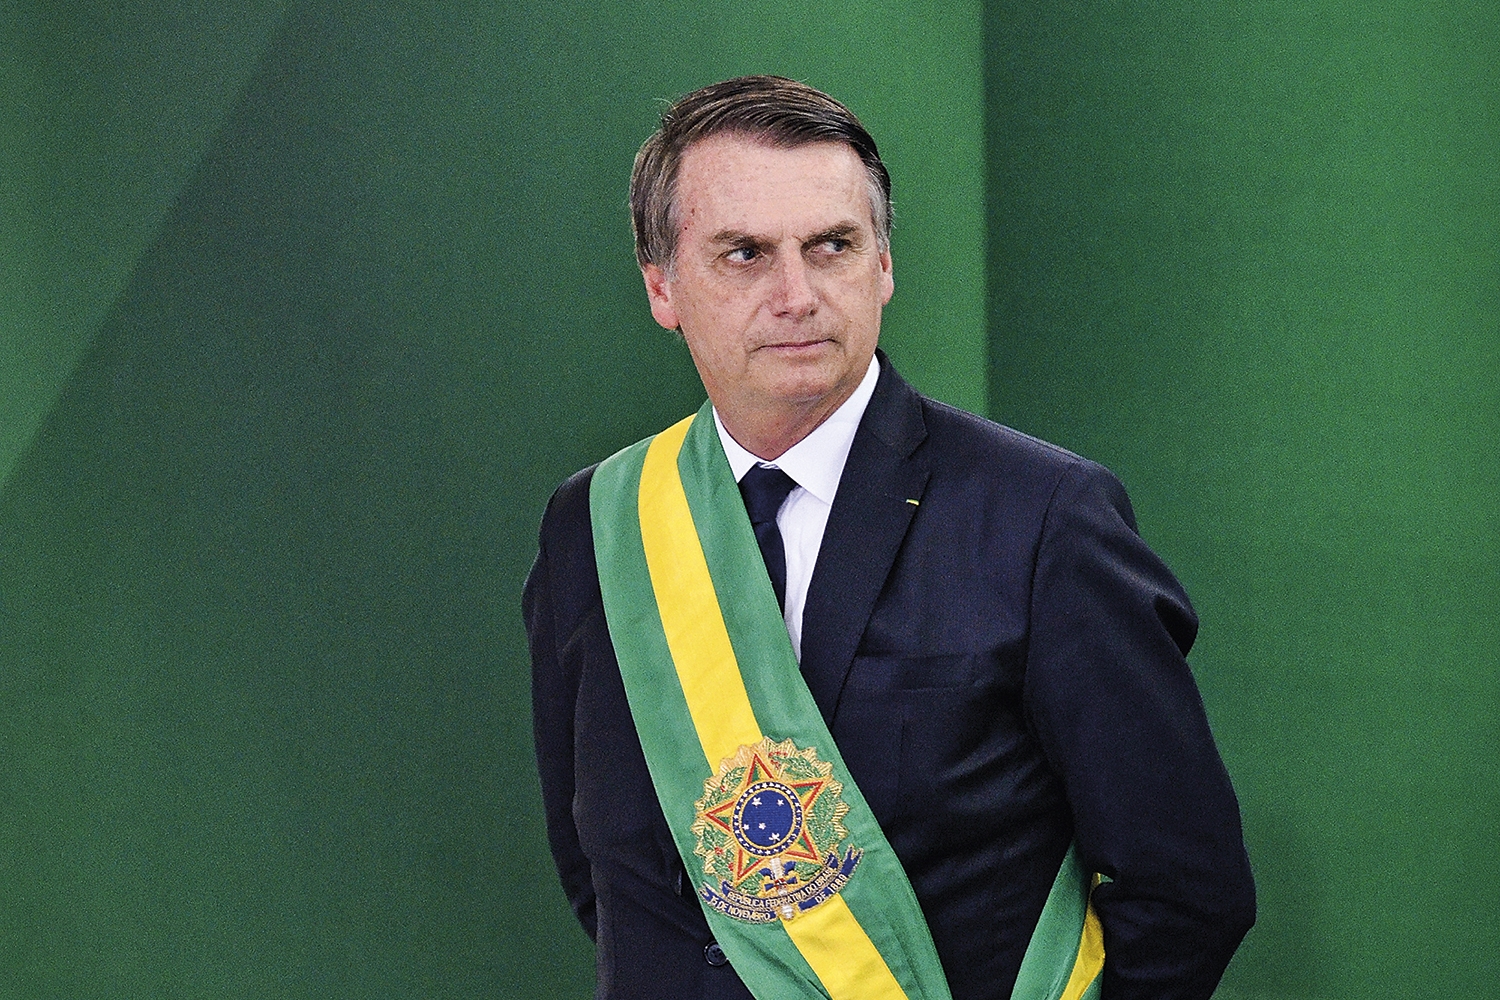 Jair Bolsonaro Biography: Facts you should know to enlarge your knowledge